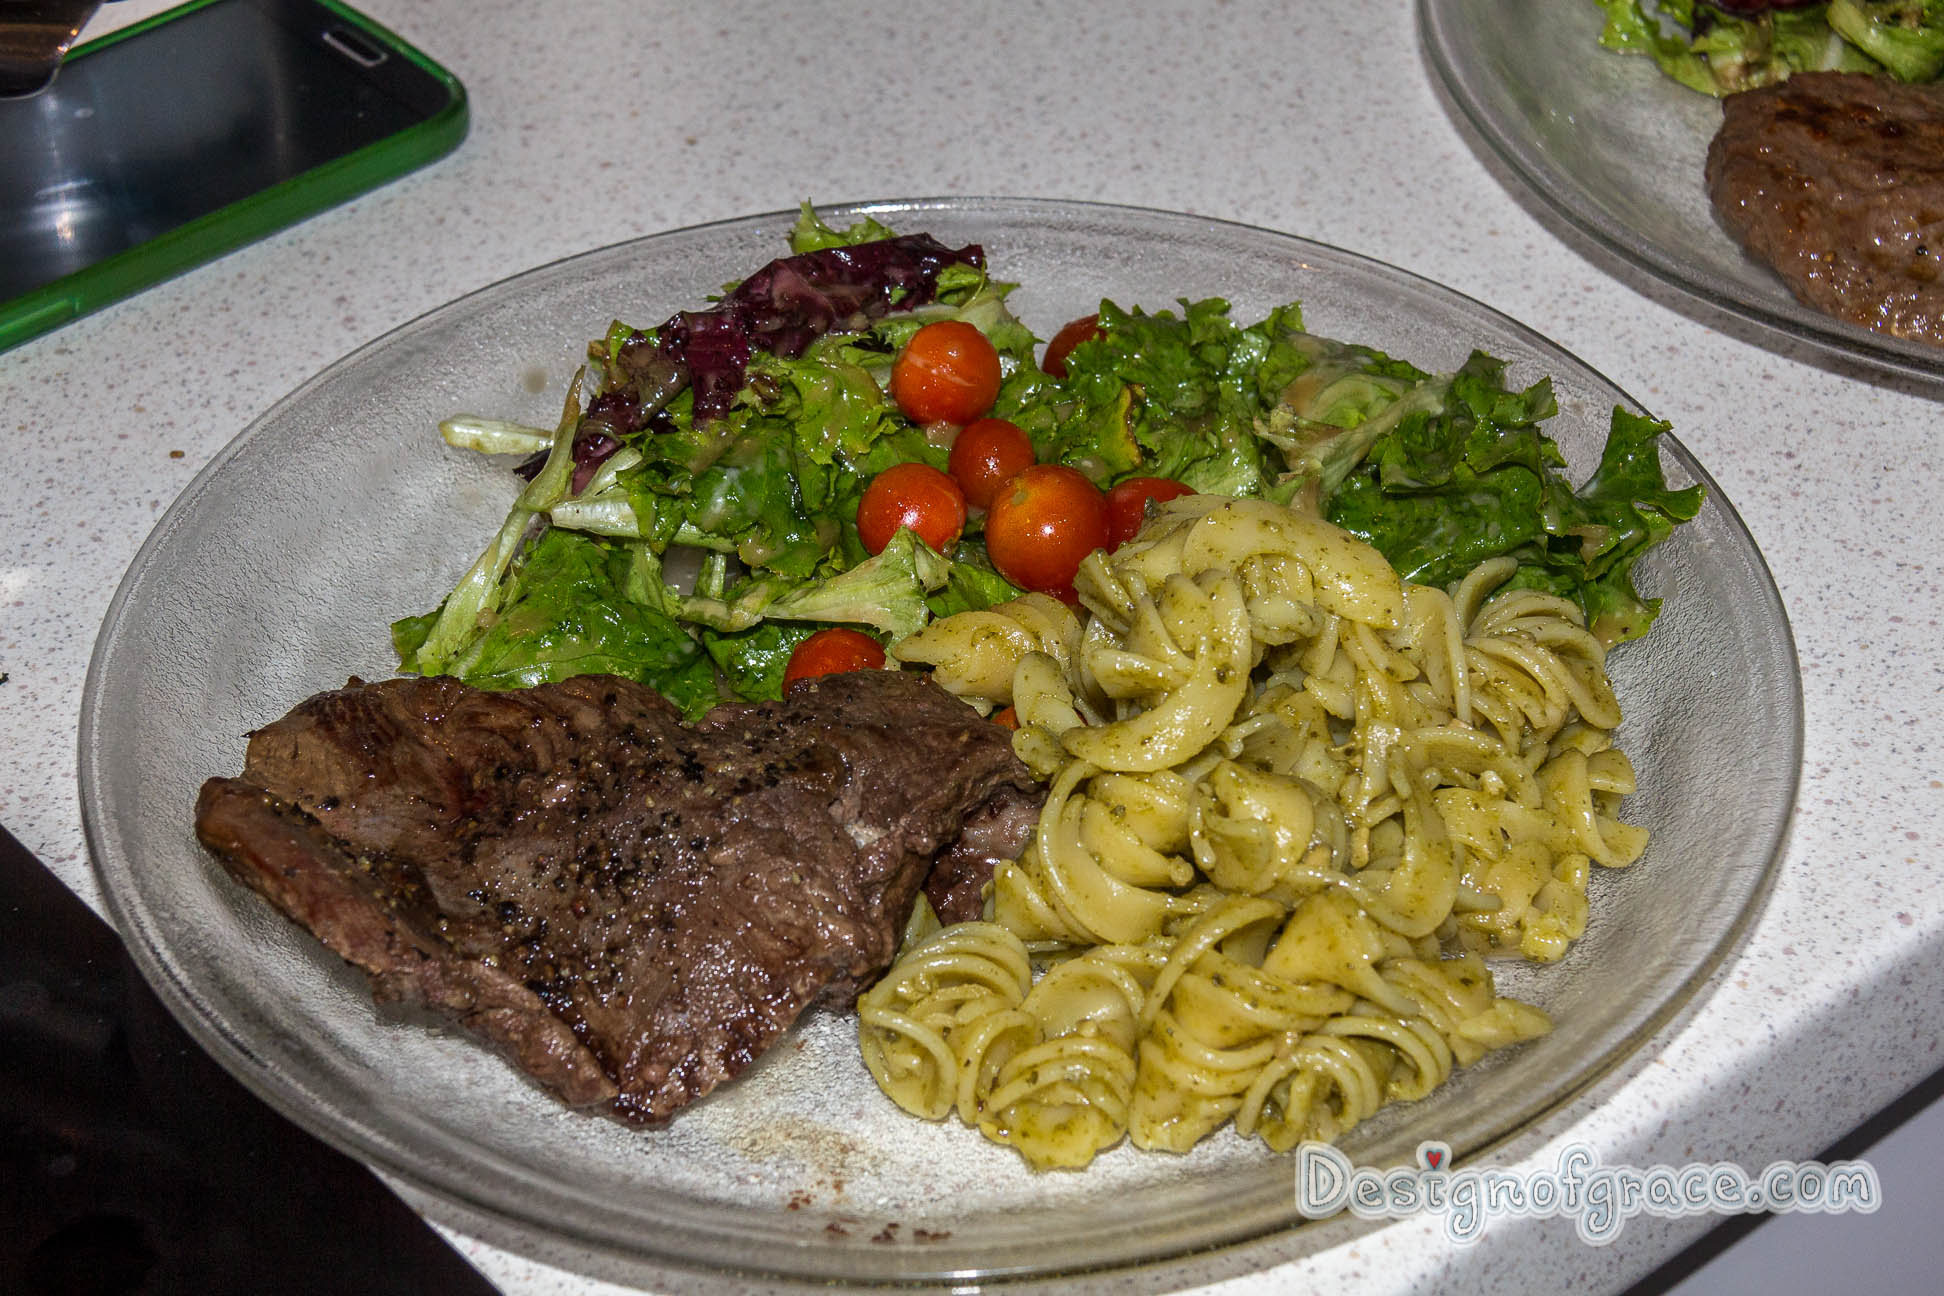 a plate of food with a kangaroo steak on the left which has been nicely browned with pesto pasta on the right and the home grown green and red lettuce and cherry tomatoes on top of the plate